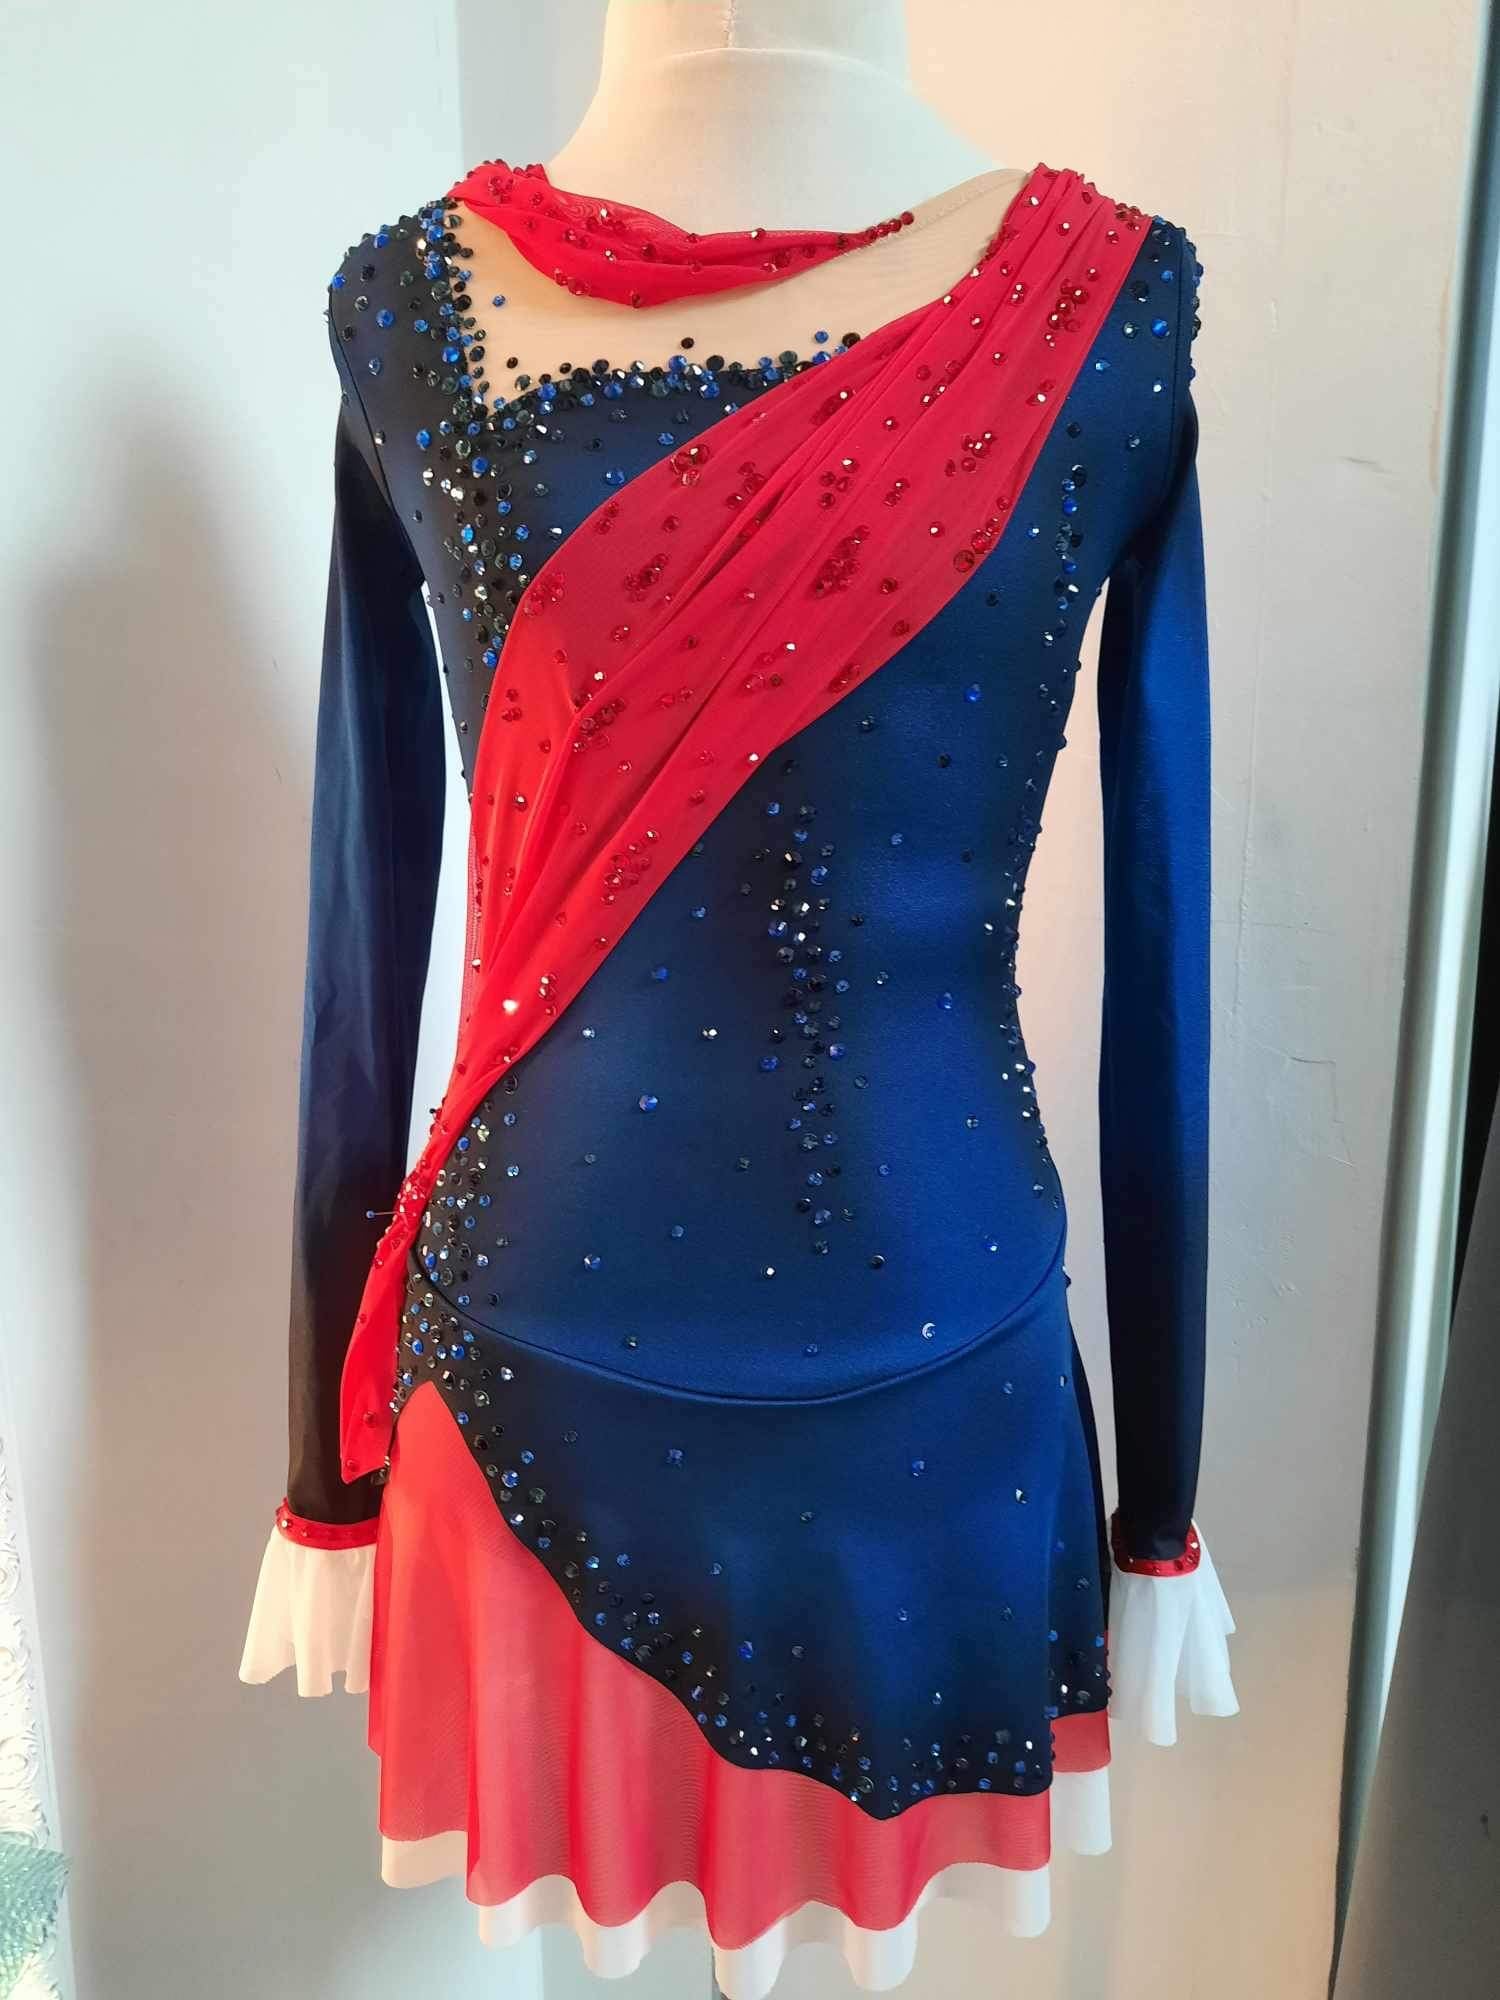 Mary Poppins inspired figure skating dress